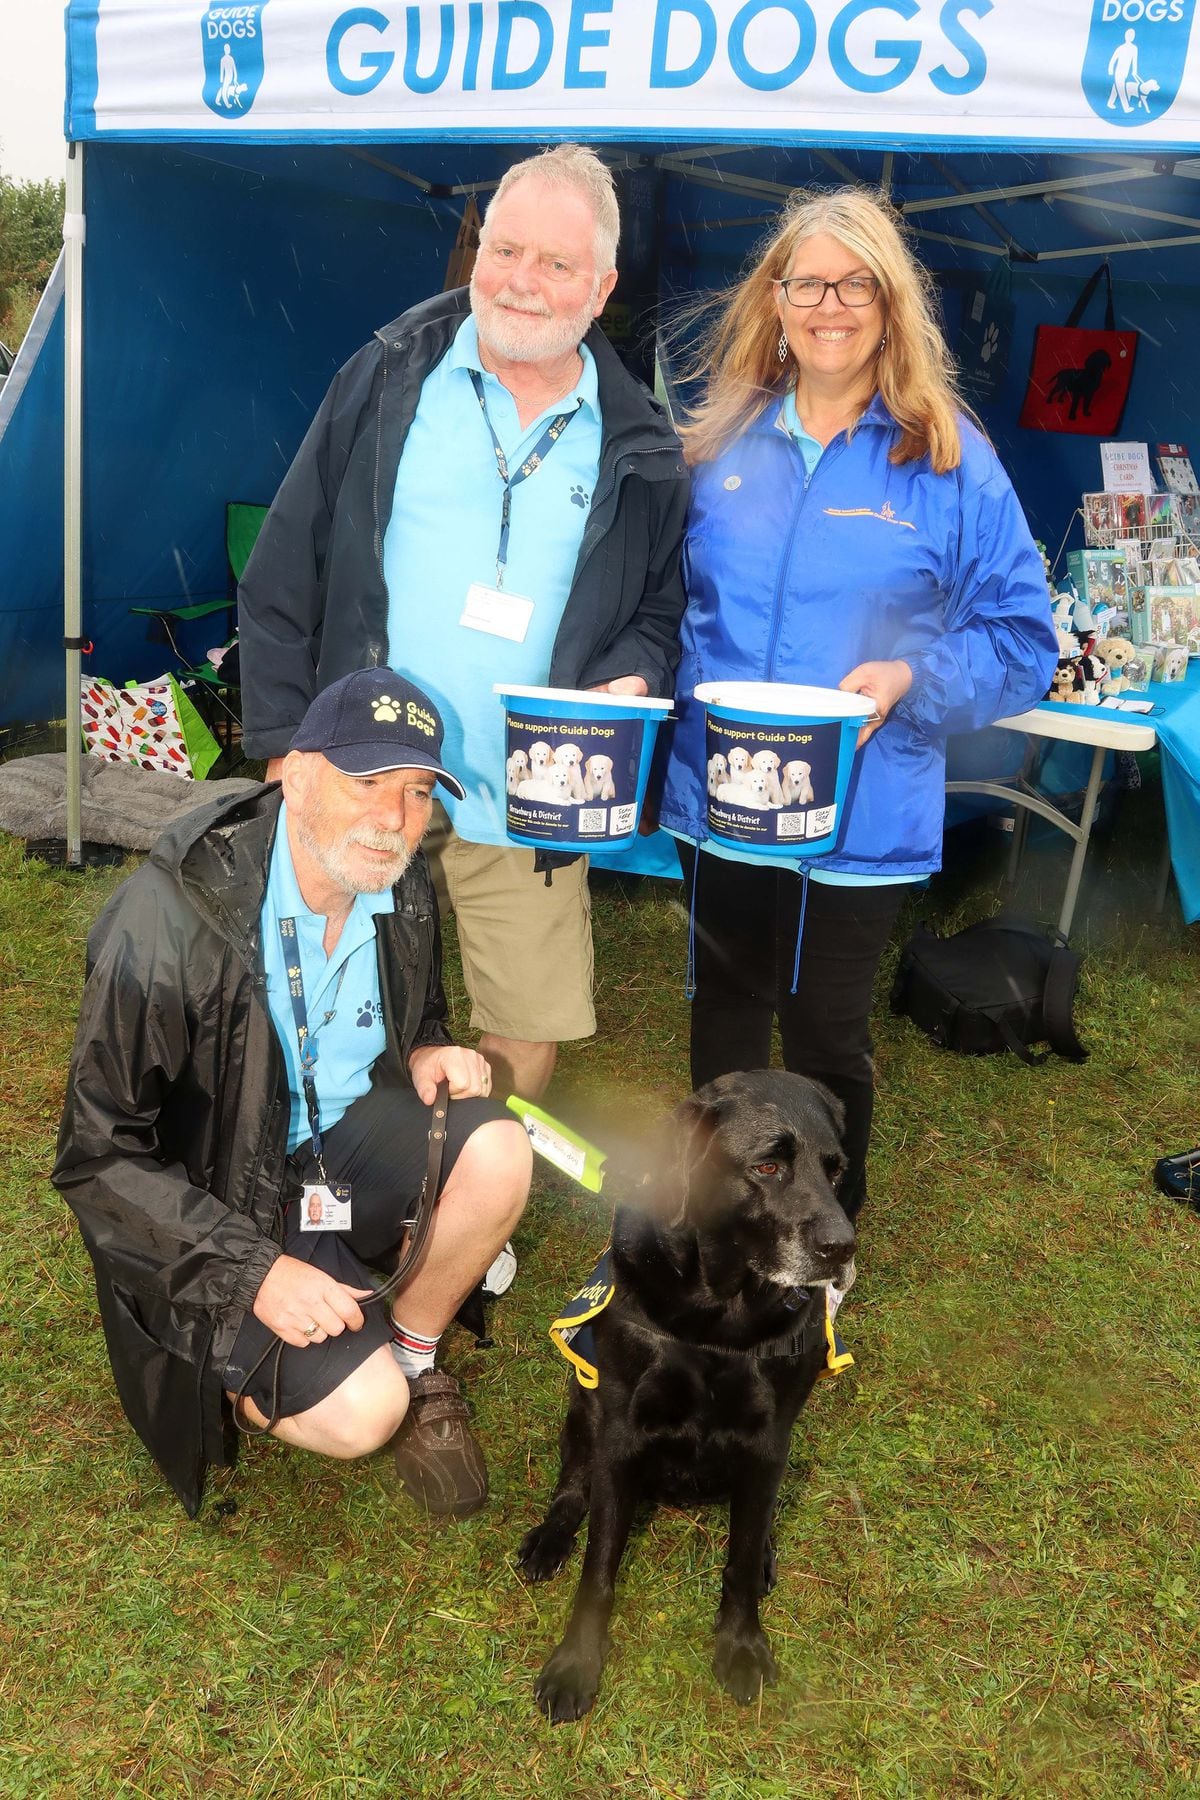 At the Guide Dogs For The Blind stall were, front, Darren Clutton  from Telford, with Quincey, and Rob Corfield and Dianne Beaumont from Shrewsbury